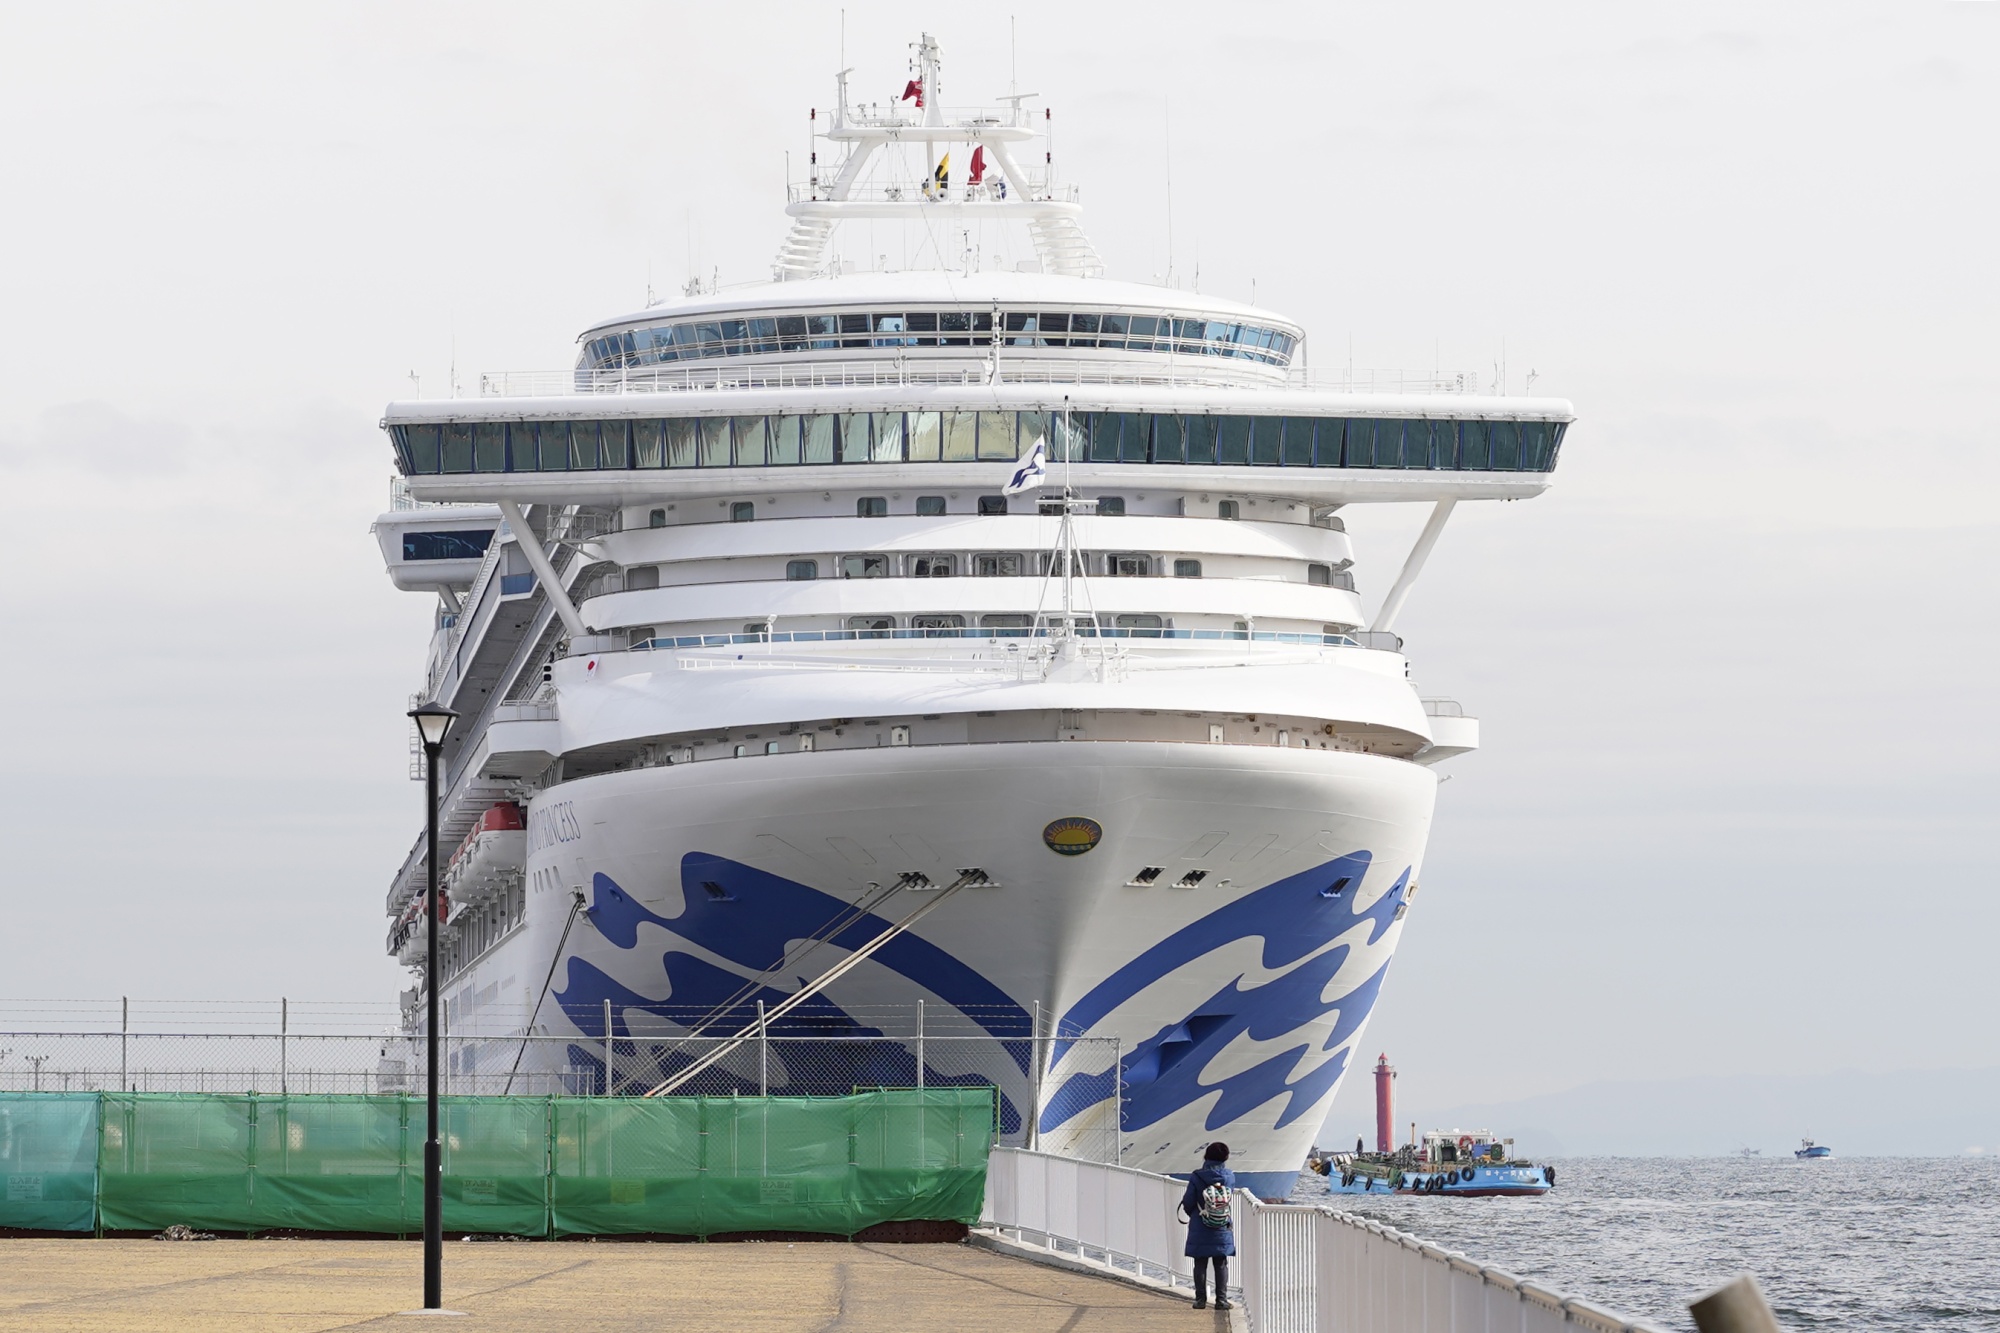 Onboard Retail Sales Could Pull Cruise Lines Out of Financial Slump